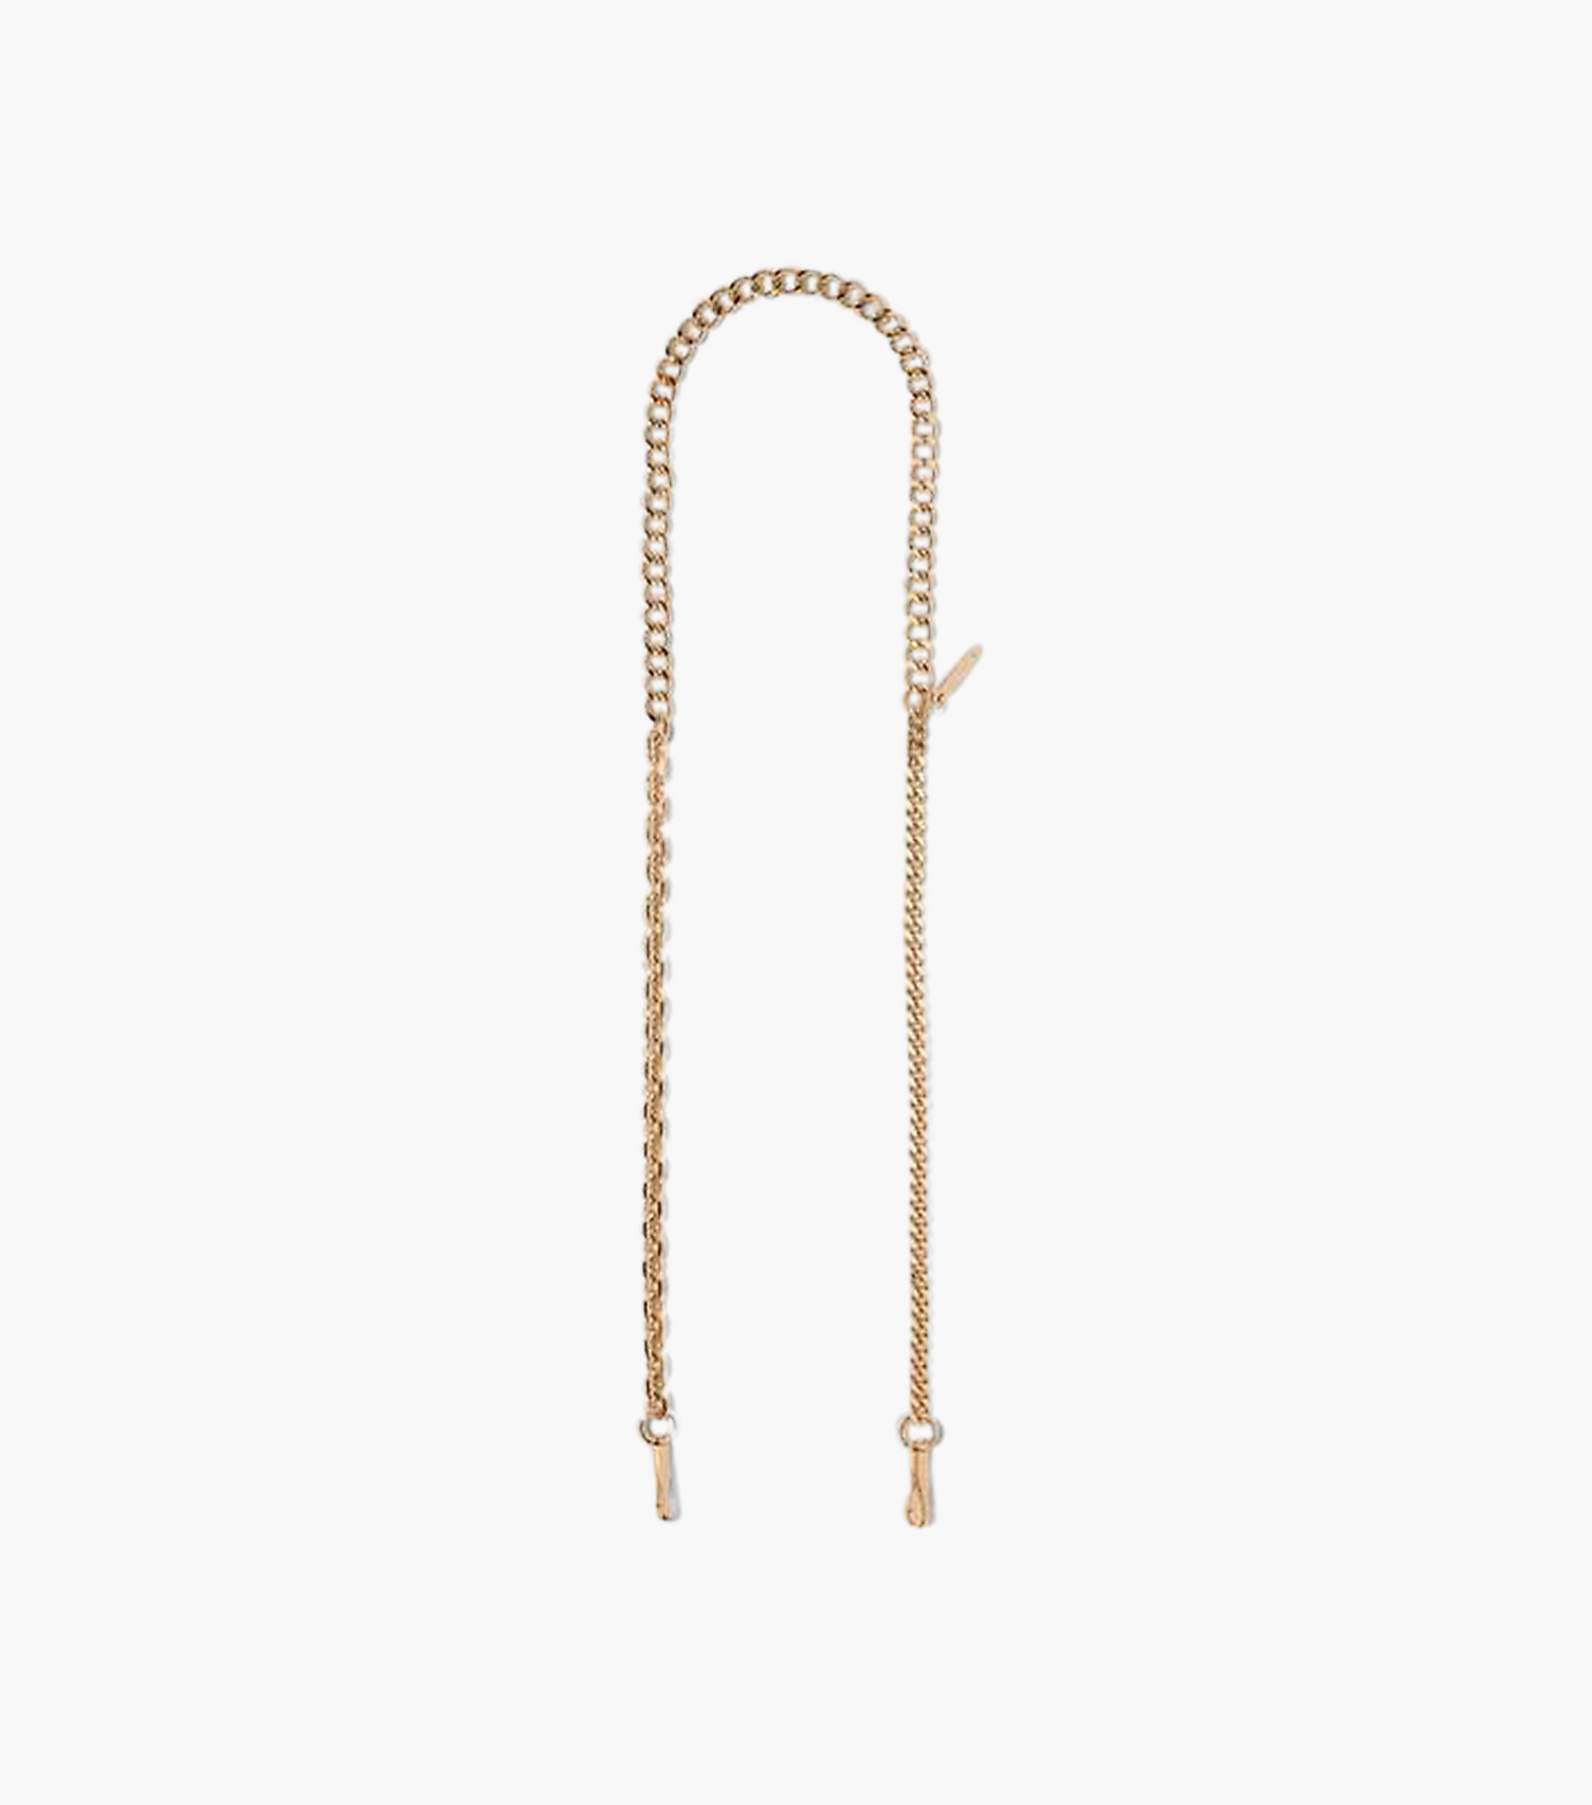 Marc Jacobs The Thin Outline Logo Black Gold Webbing Strap